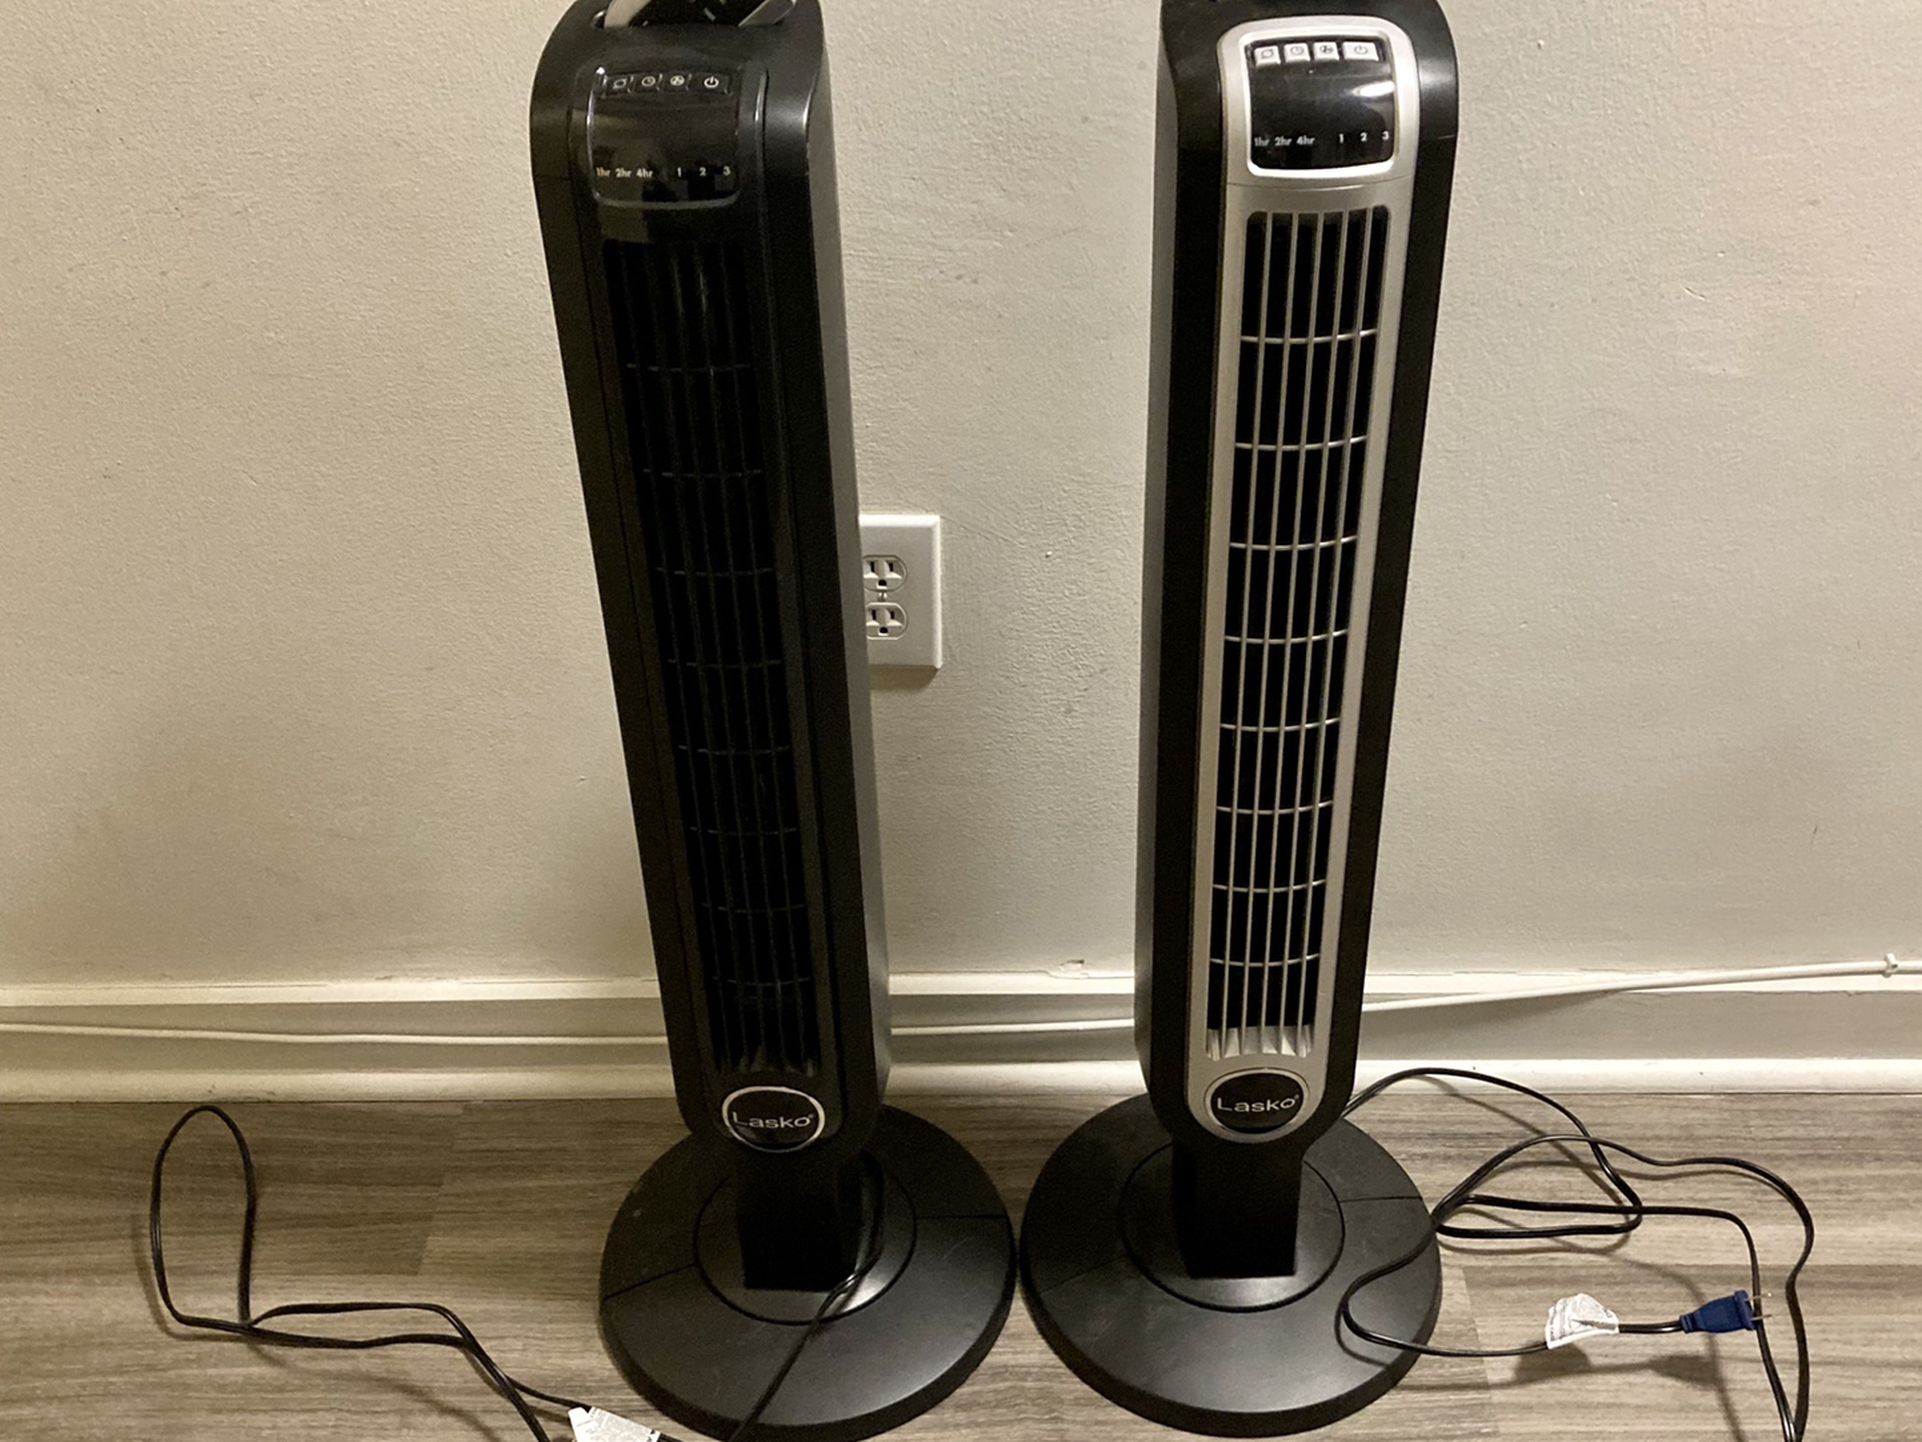 Lasko Tower Fans With Remotes (2)